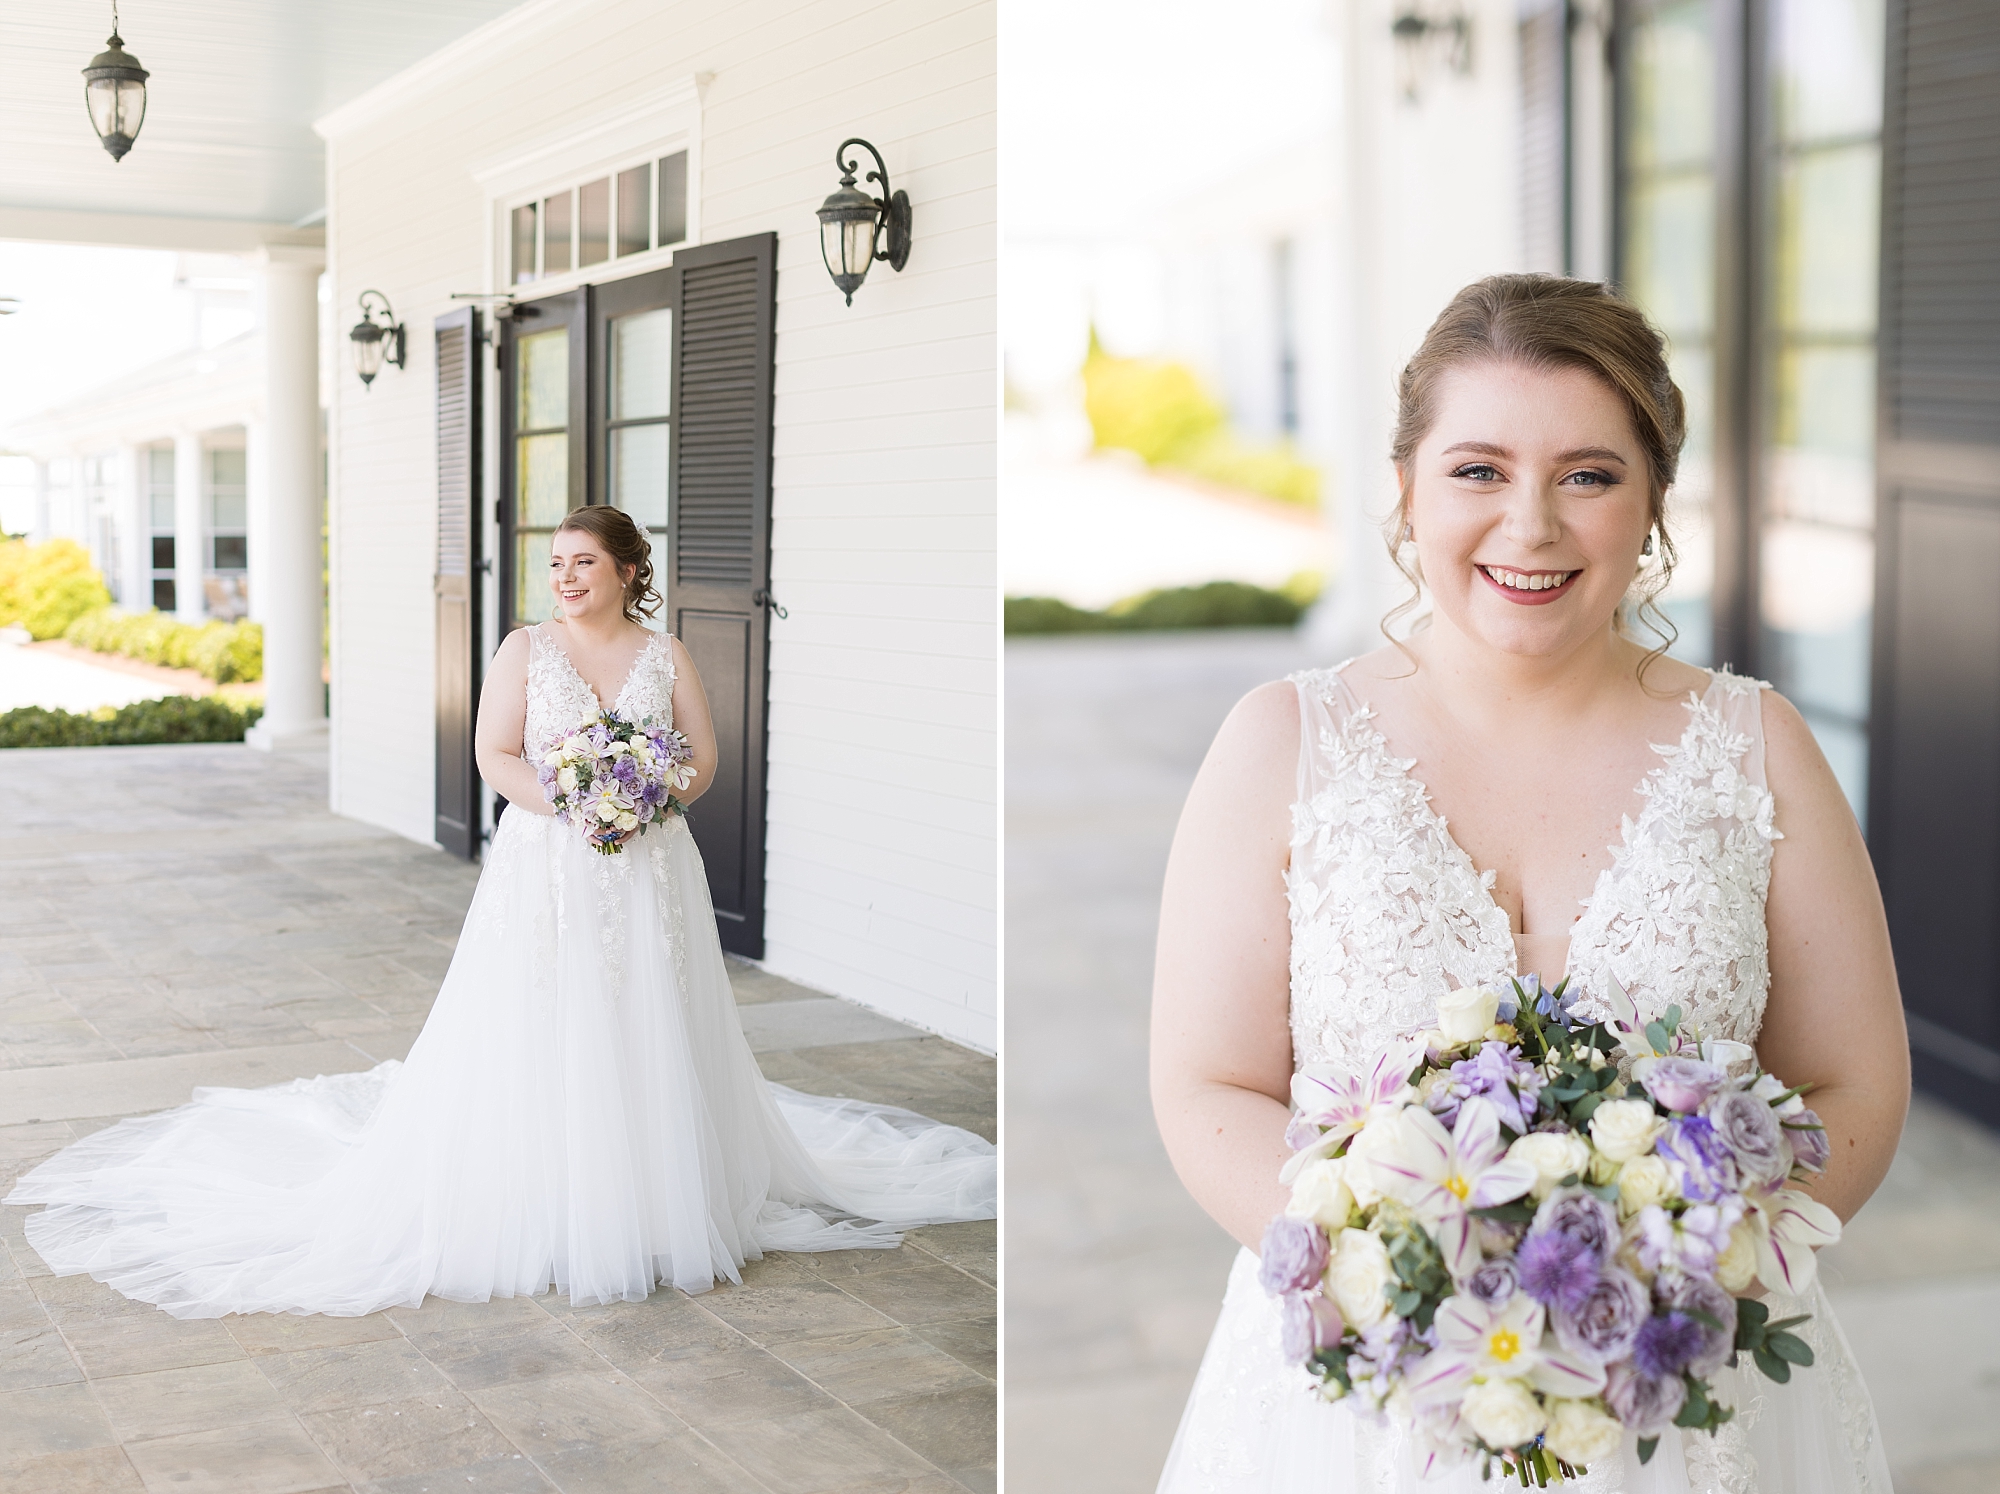 Bride holding her bouquet of purple flowers - Raleigh NC Wedding Photographer - Sarah Hinckley Photography